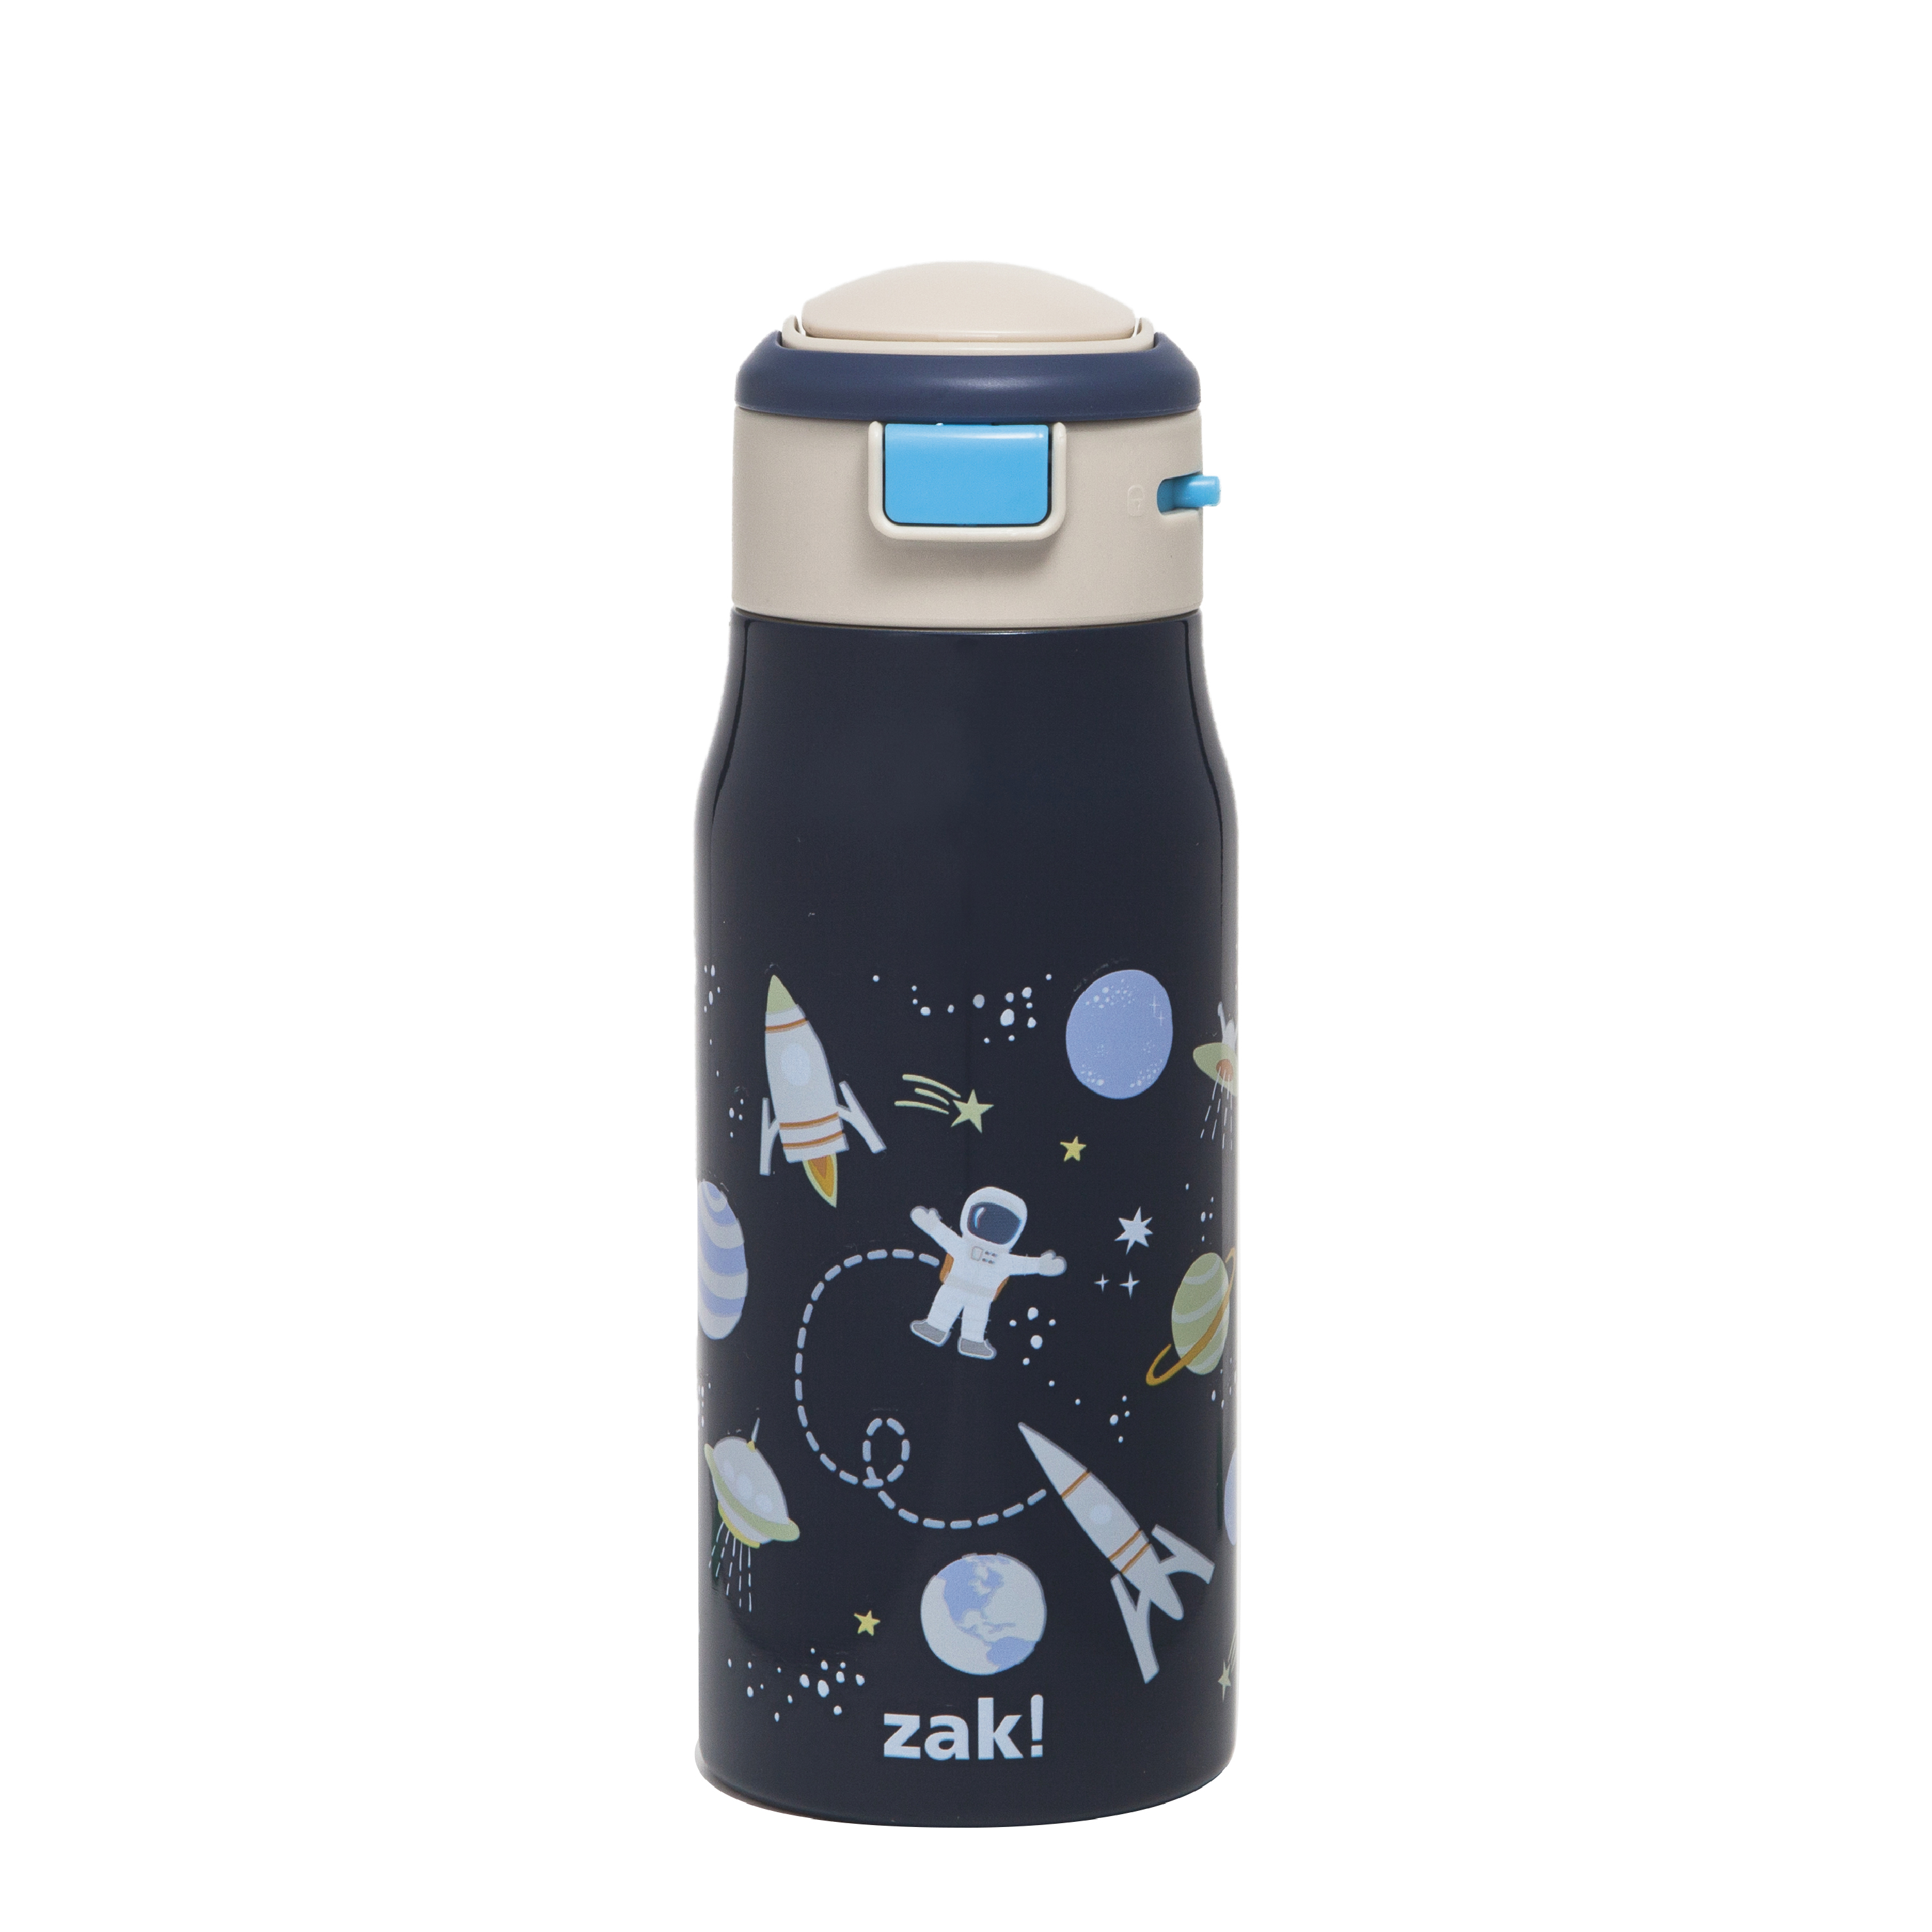 Zak Kids 13.5 ounce Mesa Double Wall Insulated Stainless Steel Water Bottle, Outer Space slideshow image 1